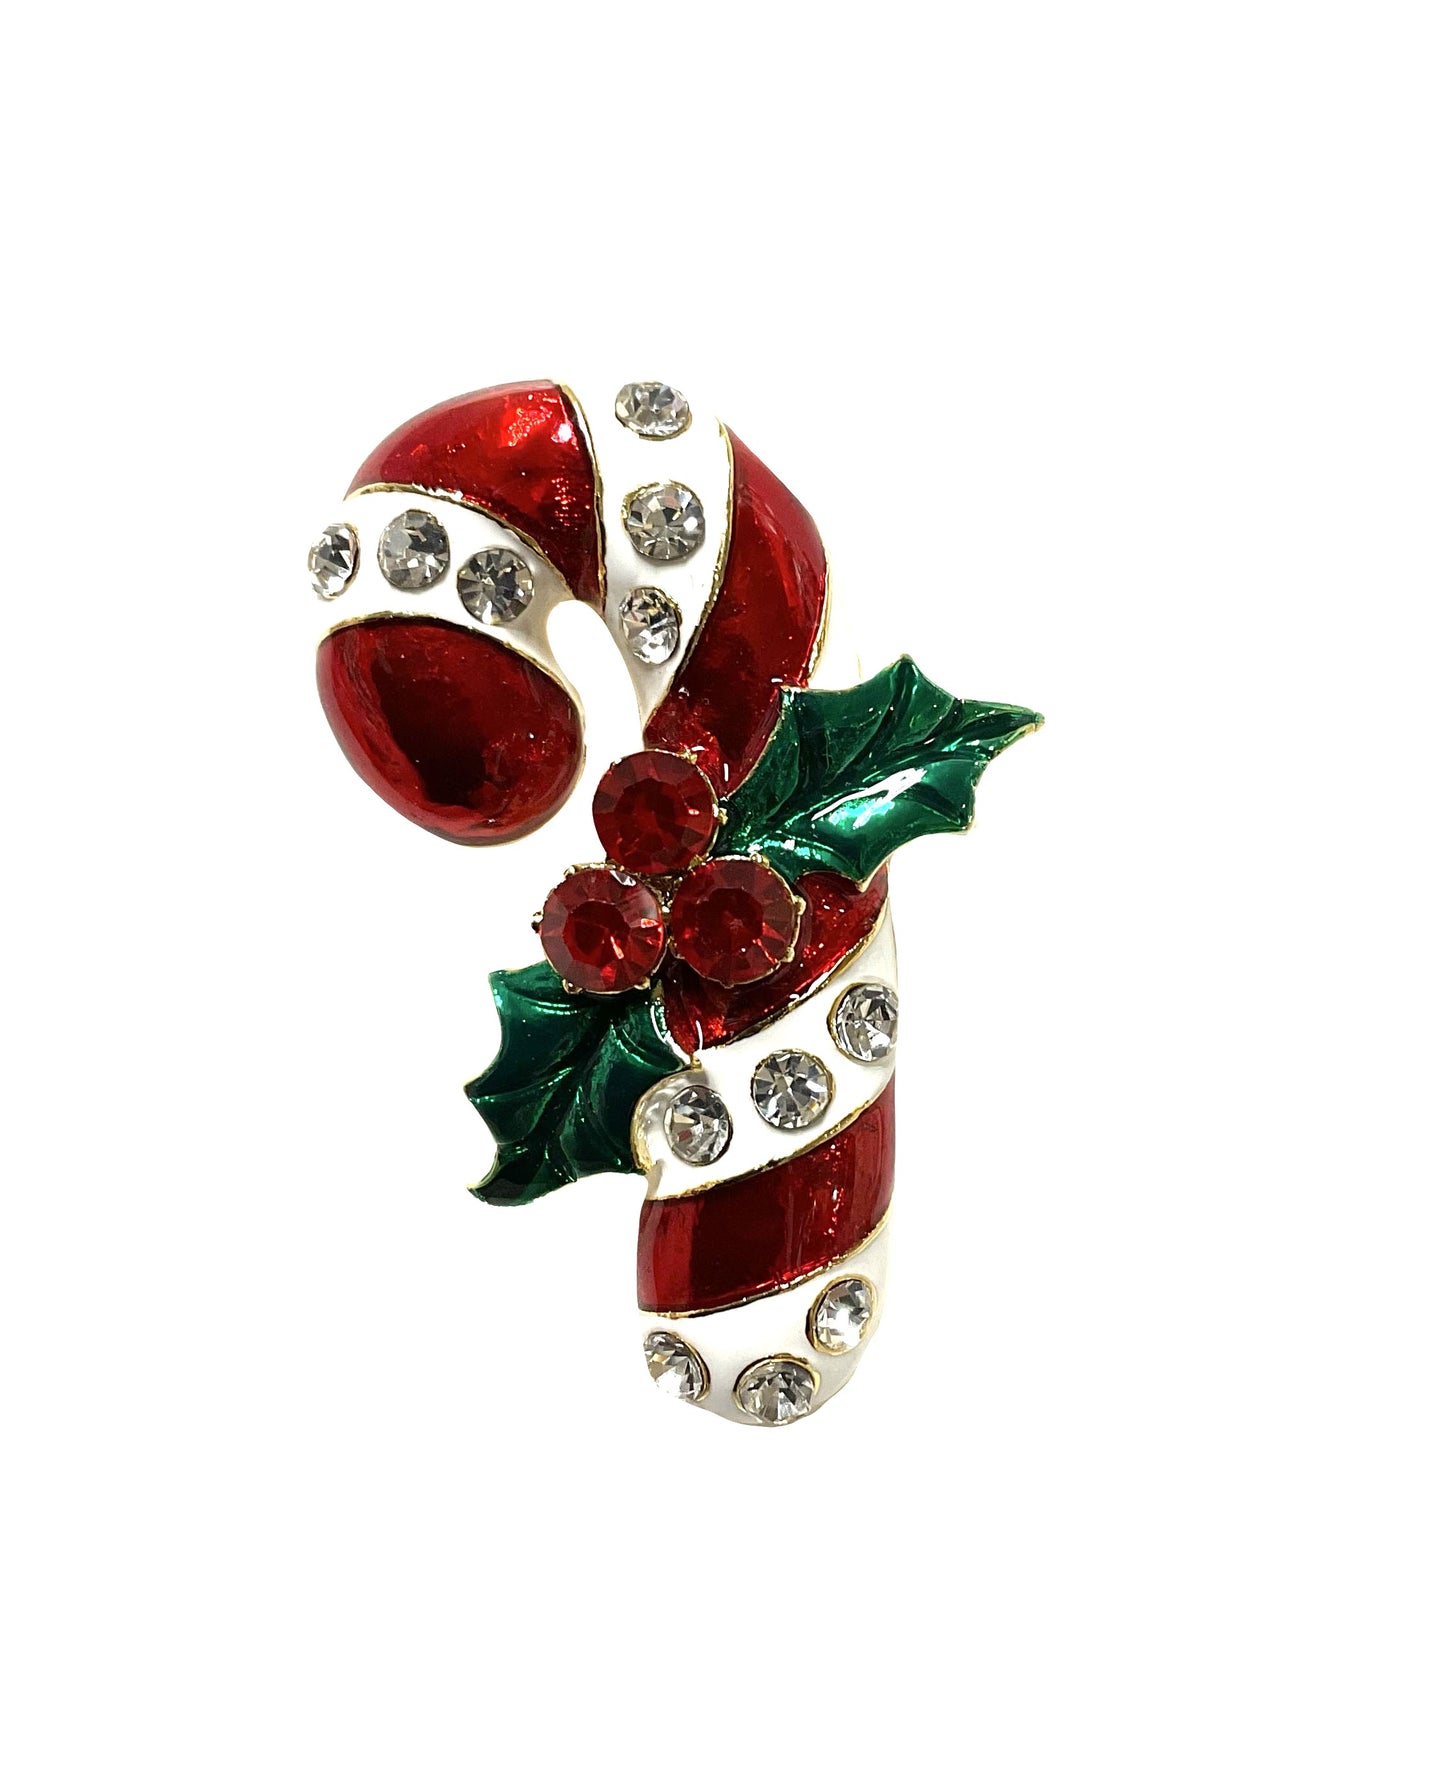 Candy Cane Pin #19-11372